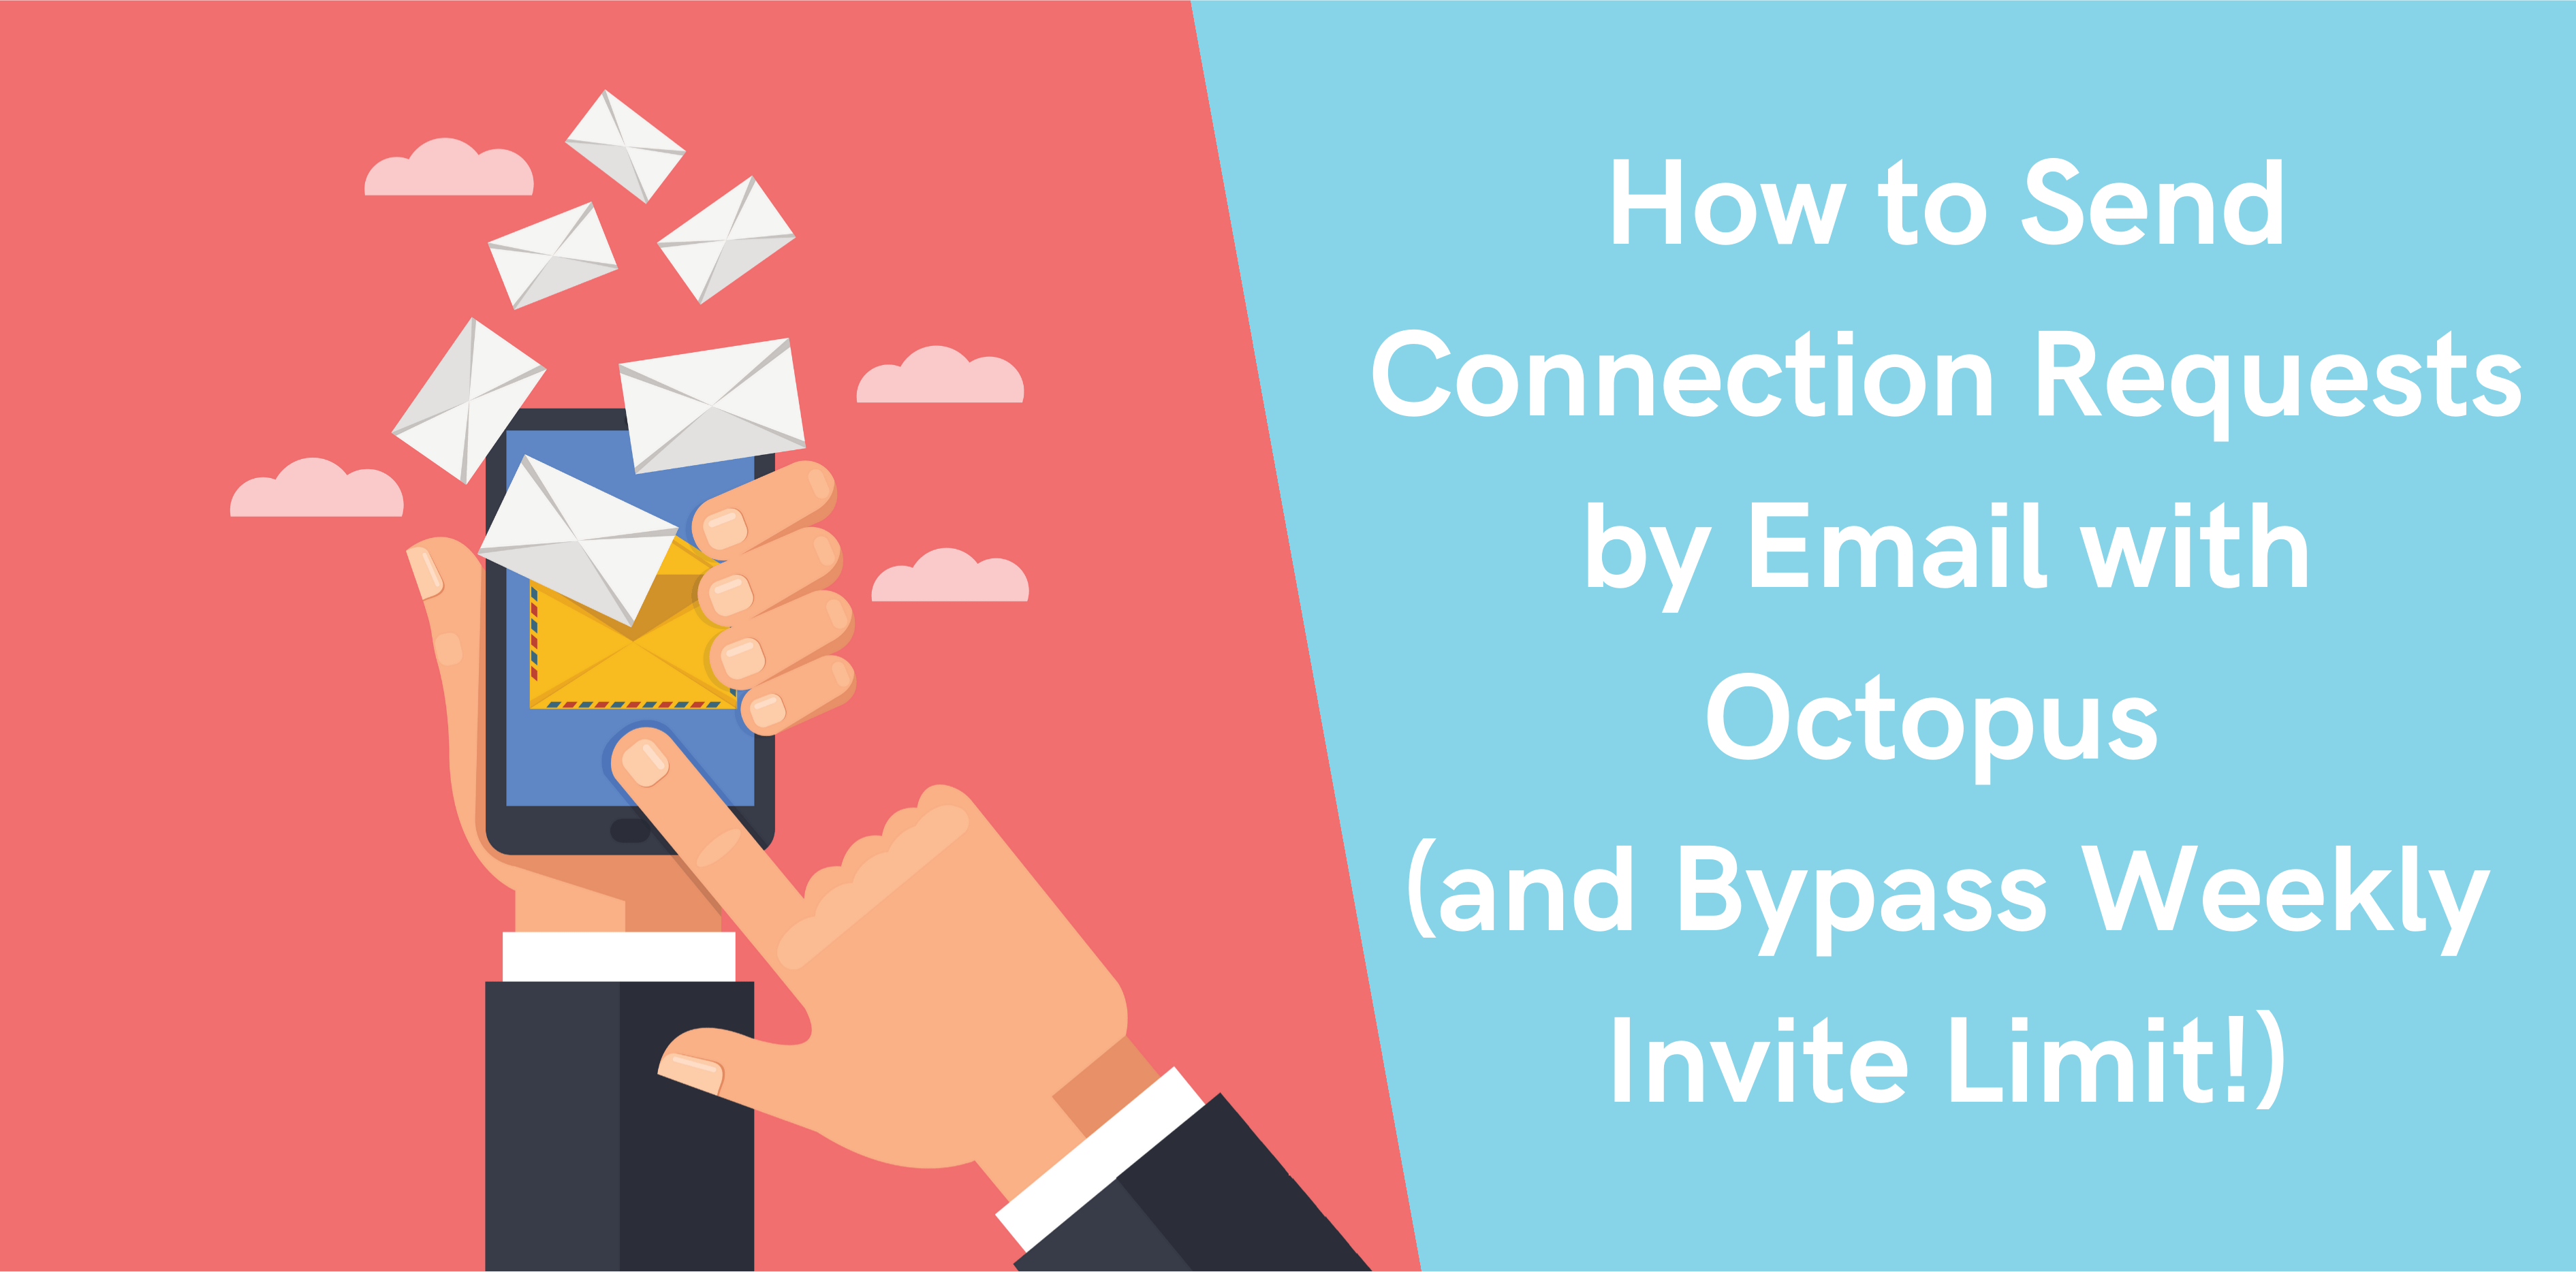 How-to-Send-Connection-Requests-by-Email-with-Octopus-(and-Bypass-Weekly-Invite-Limit!)